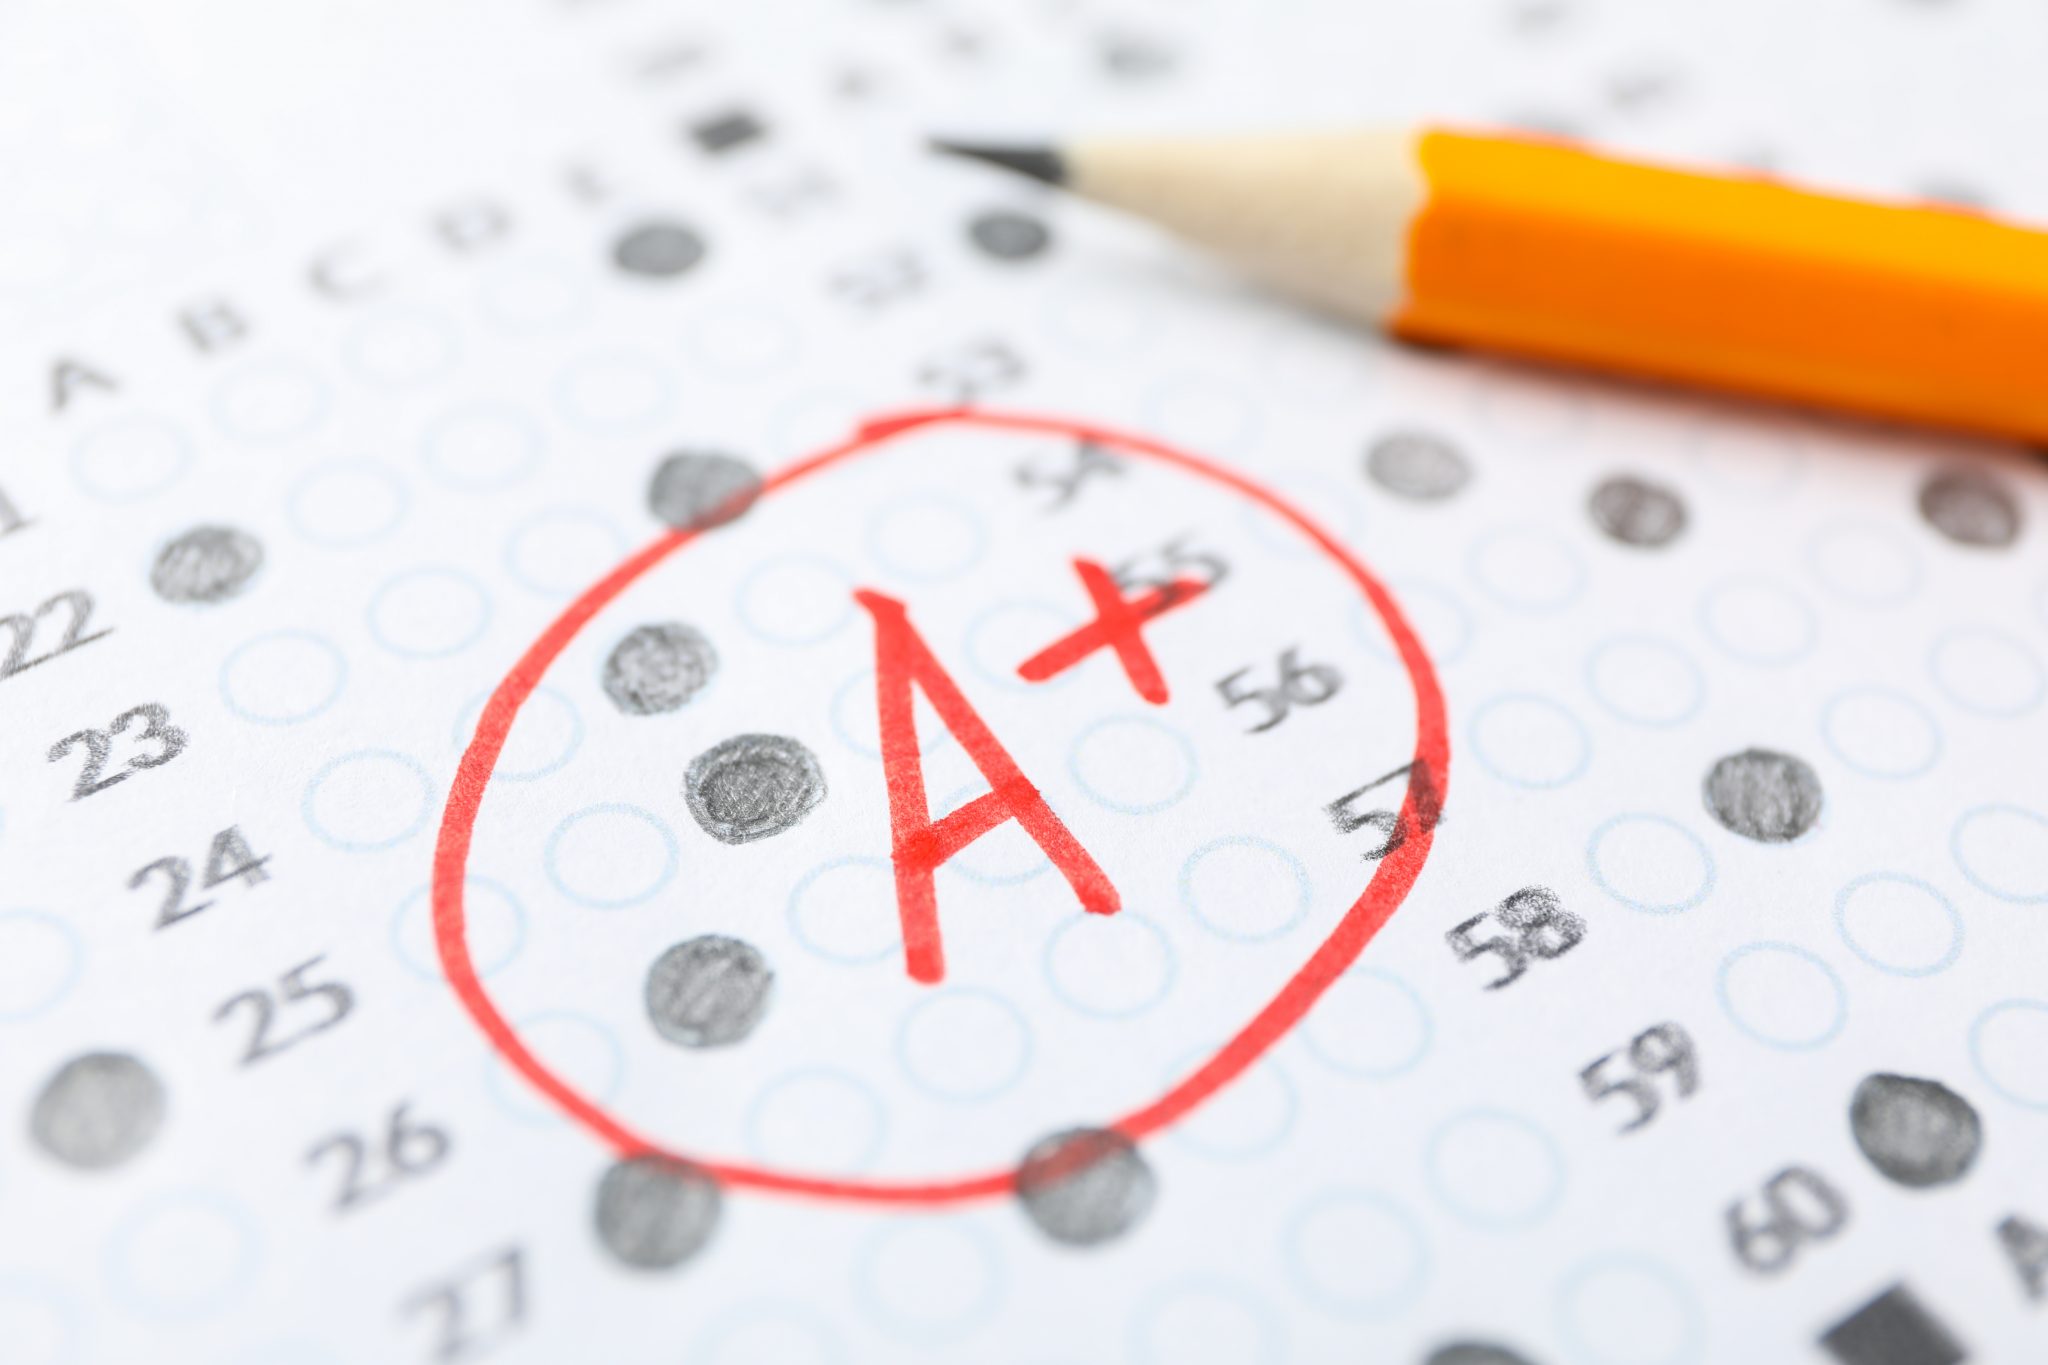 test-score-sheet-with-answers-grade-a-and-pencil-close-up-the